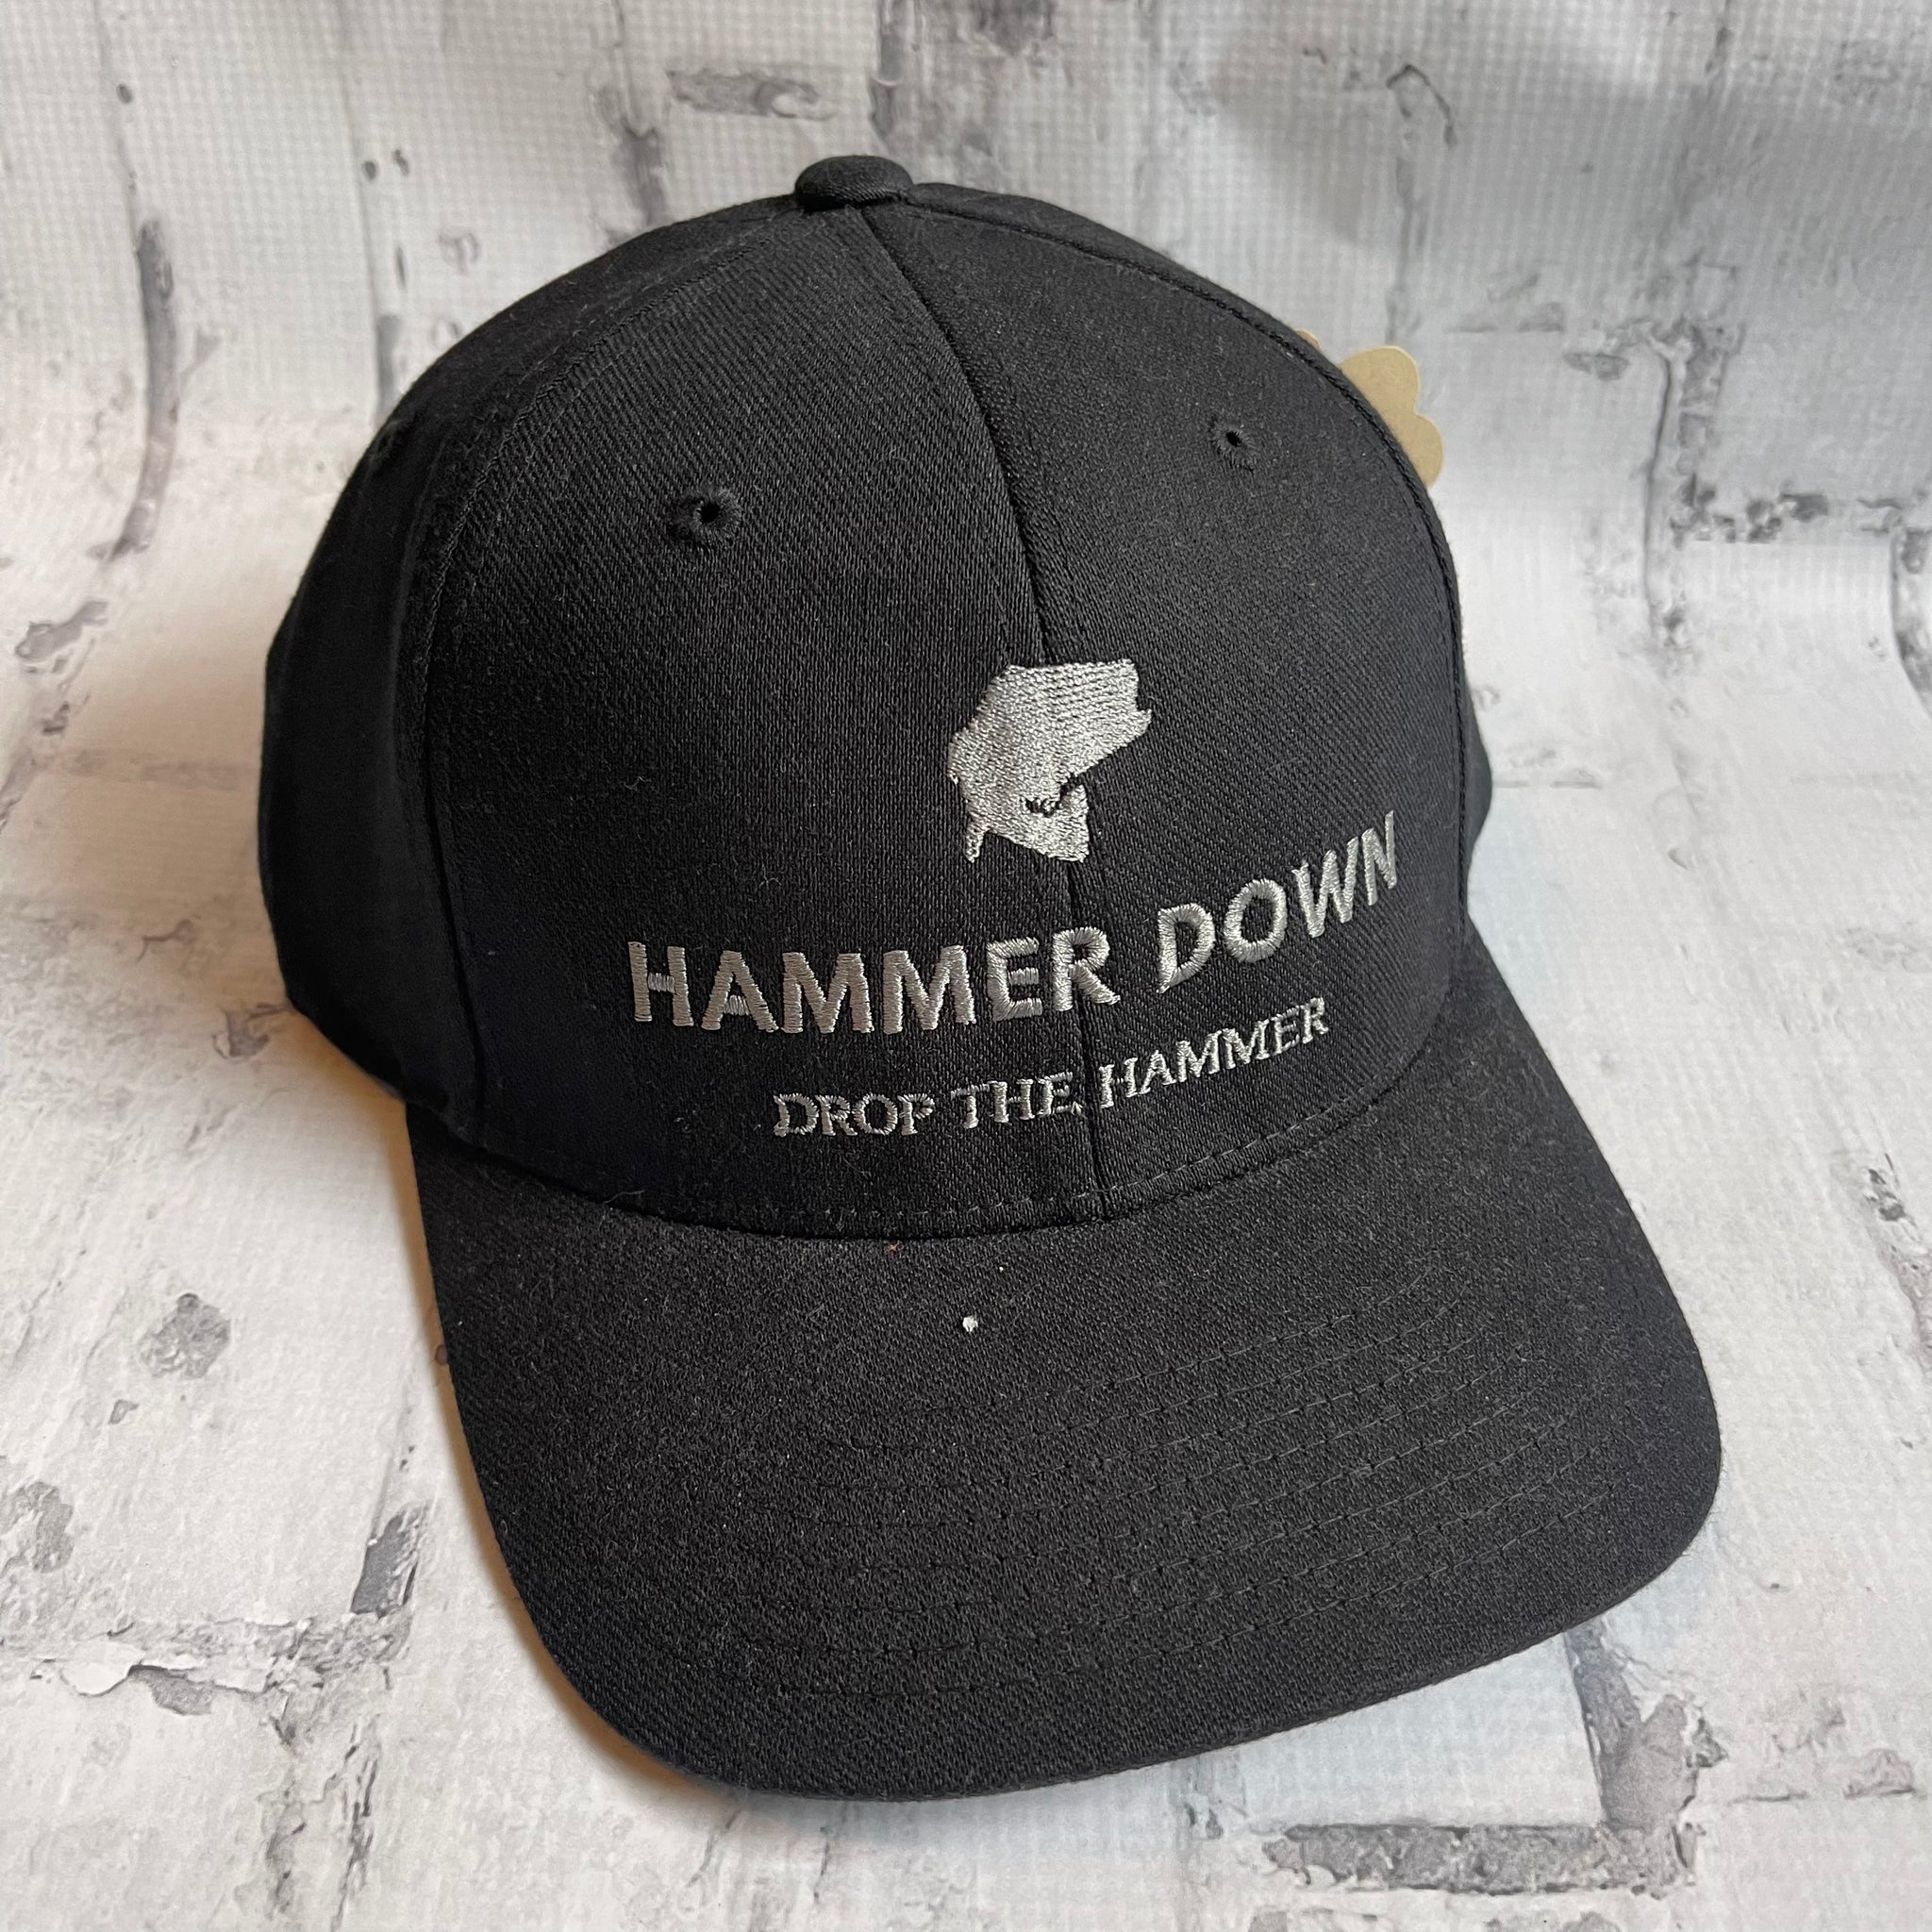 Hammer Down "Gray DTH Bass" Flex Fit Hat - Maroon with Woven Patch - Southern Charm "Shop The Charm"